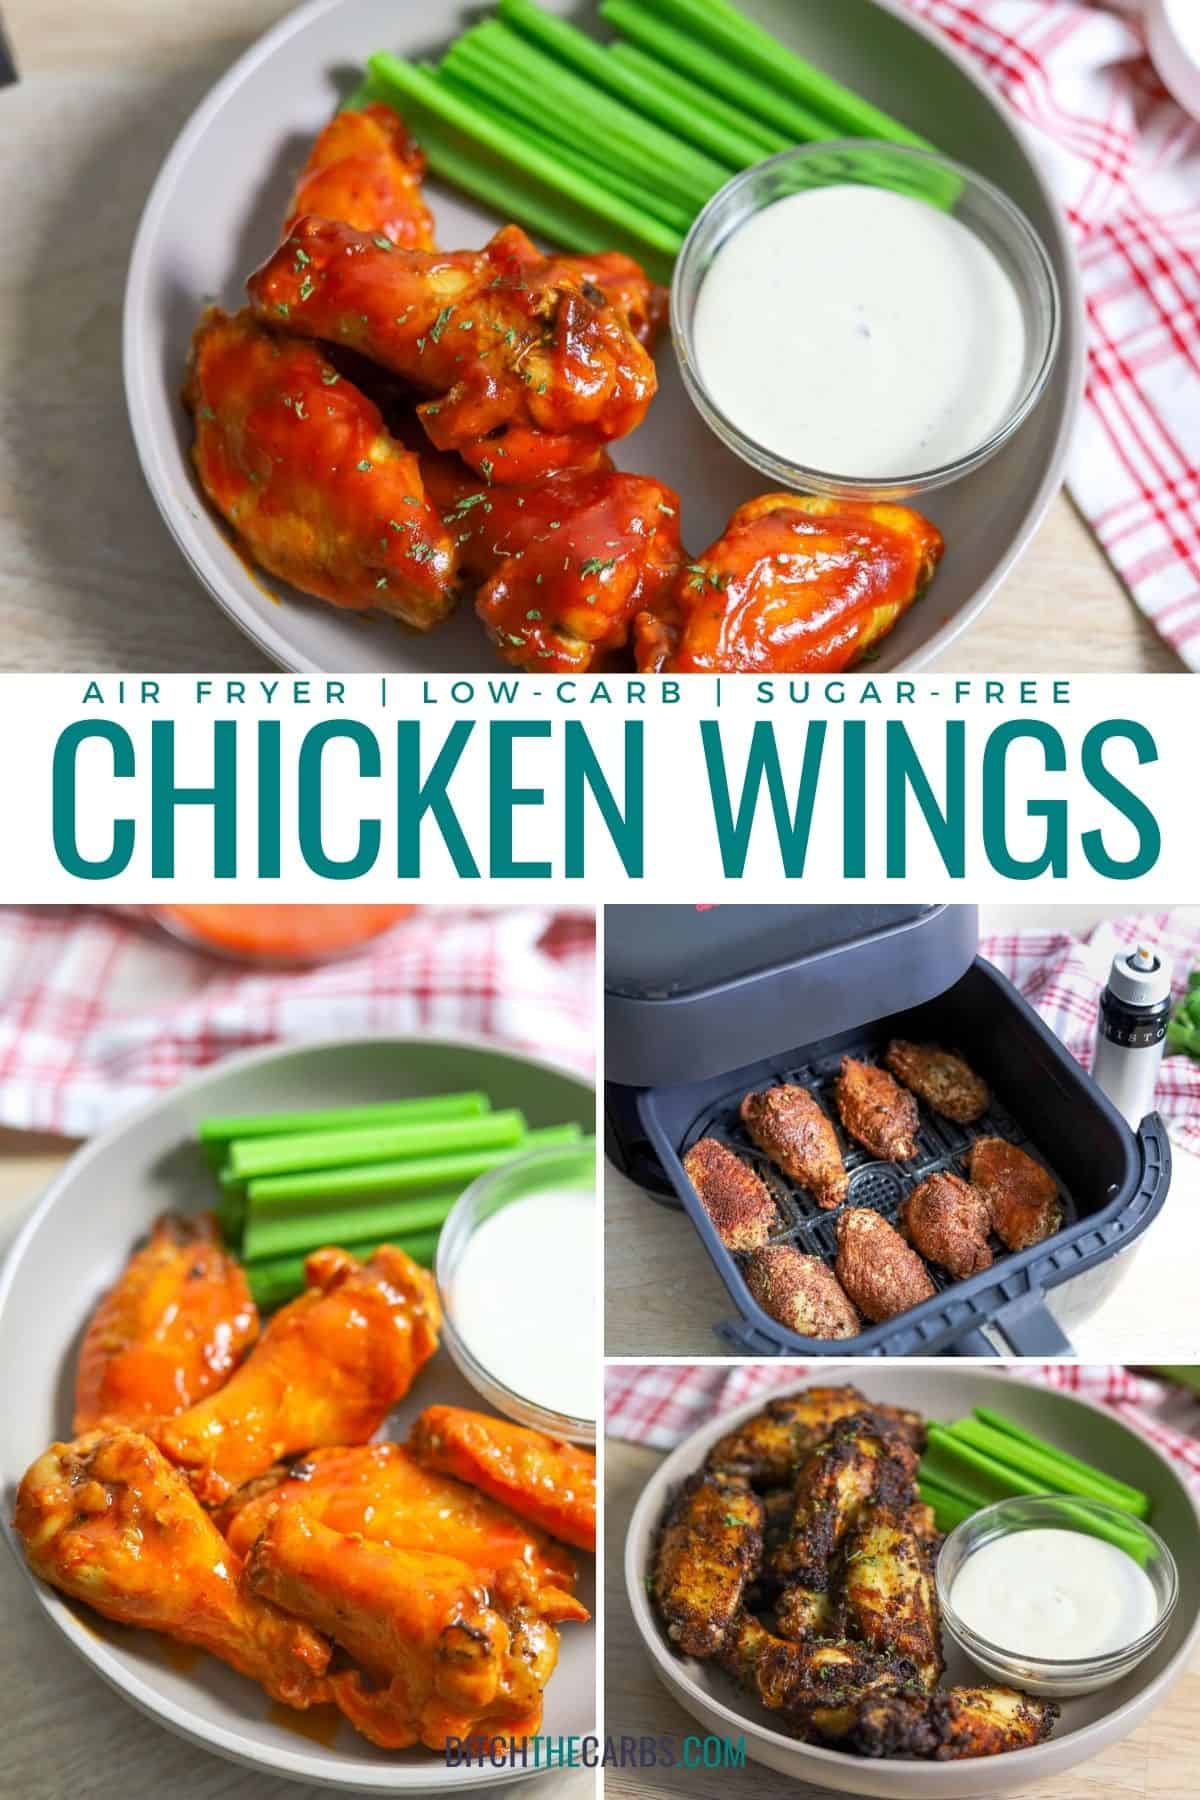 Collage of low carb, sugar free, keto friendly air fryer chicken wings